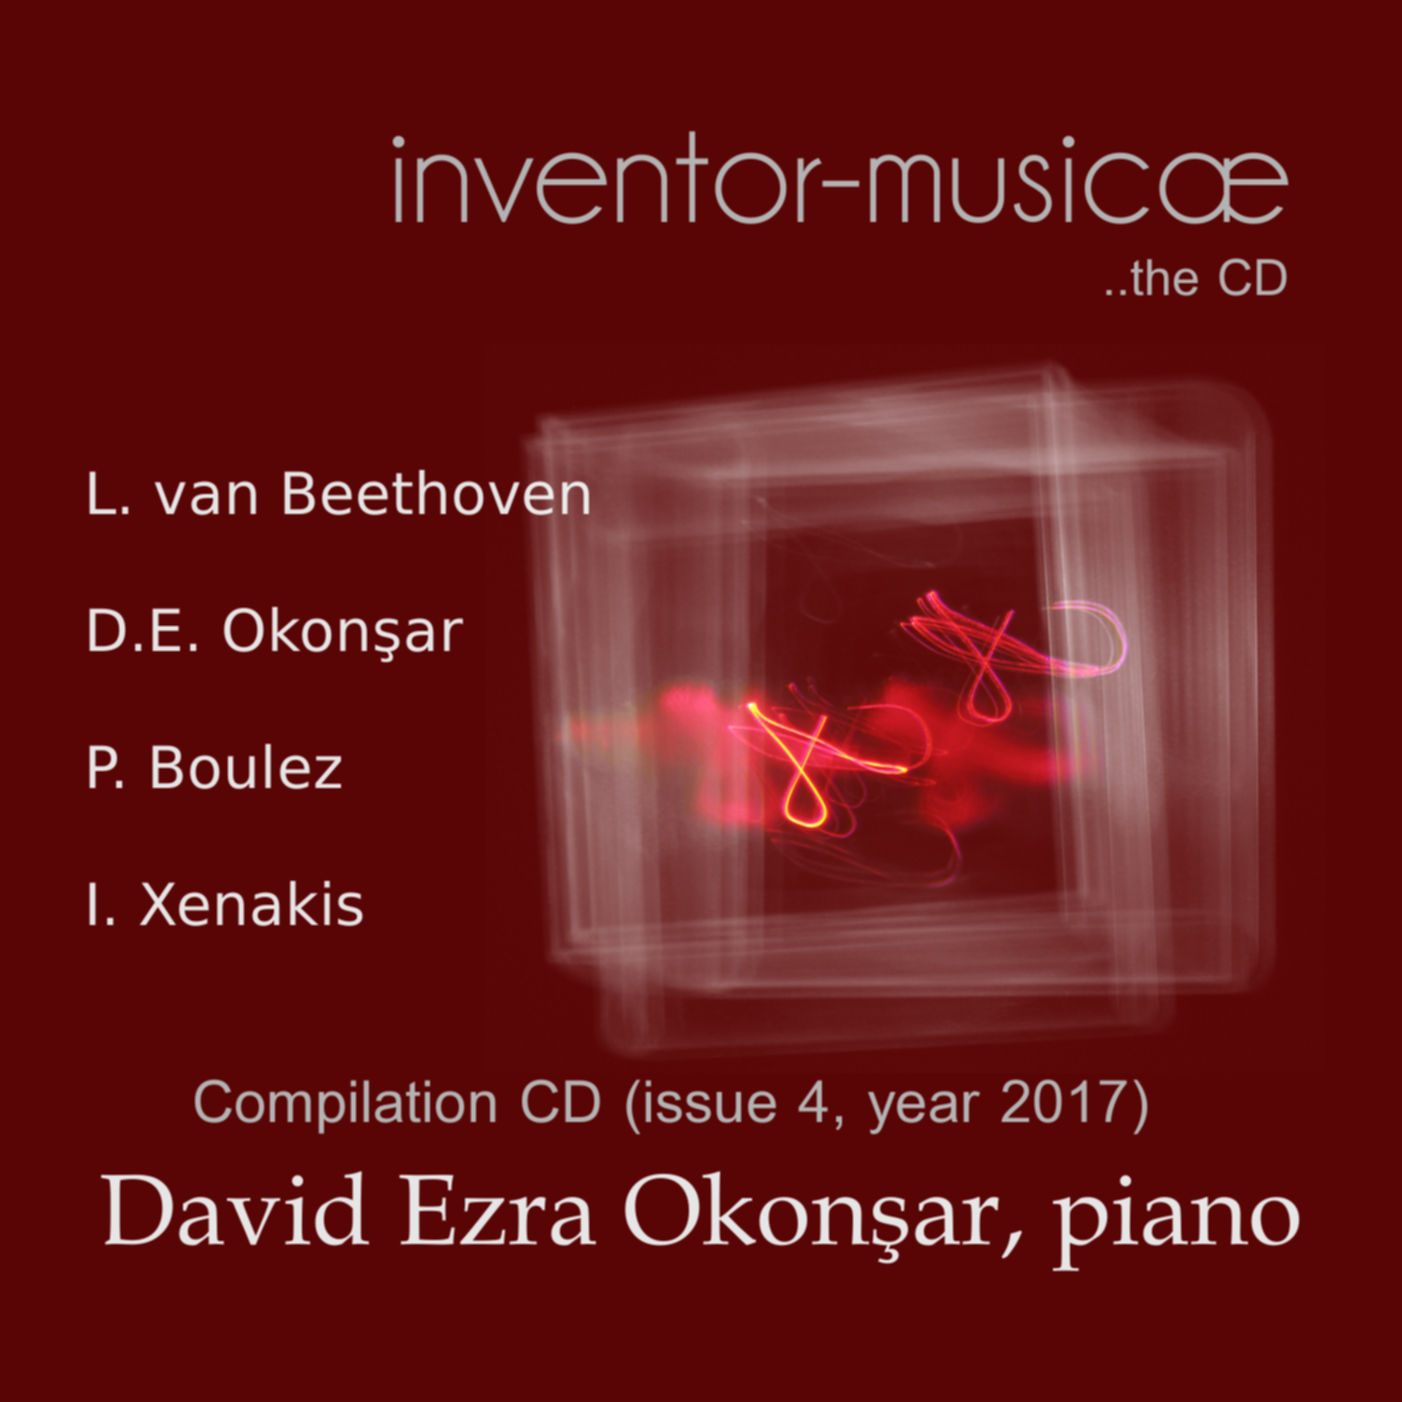 CDCovers/Inventor-Musicae_ProductImage-1.png